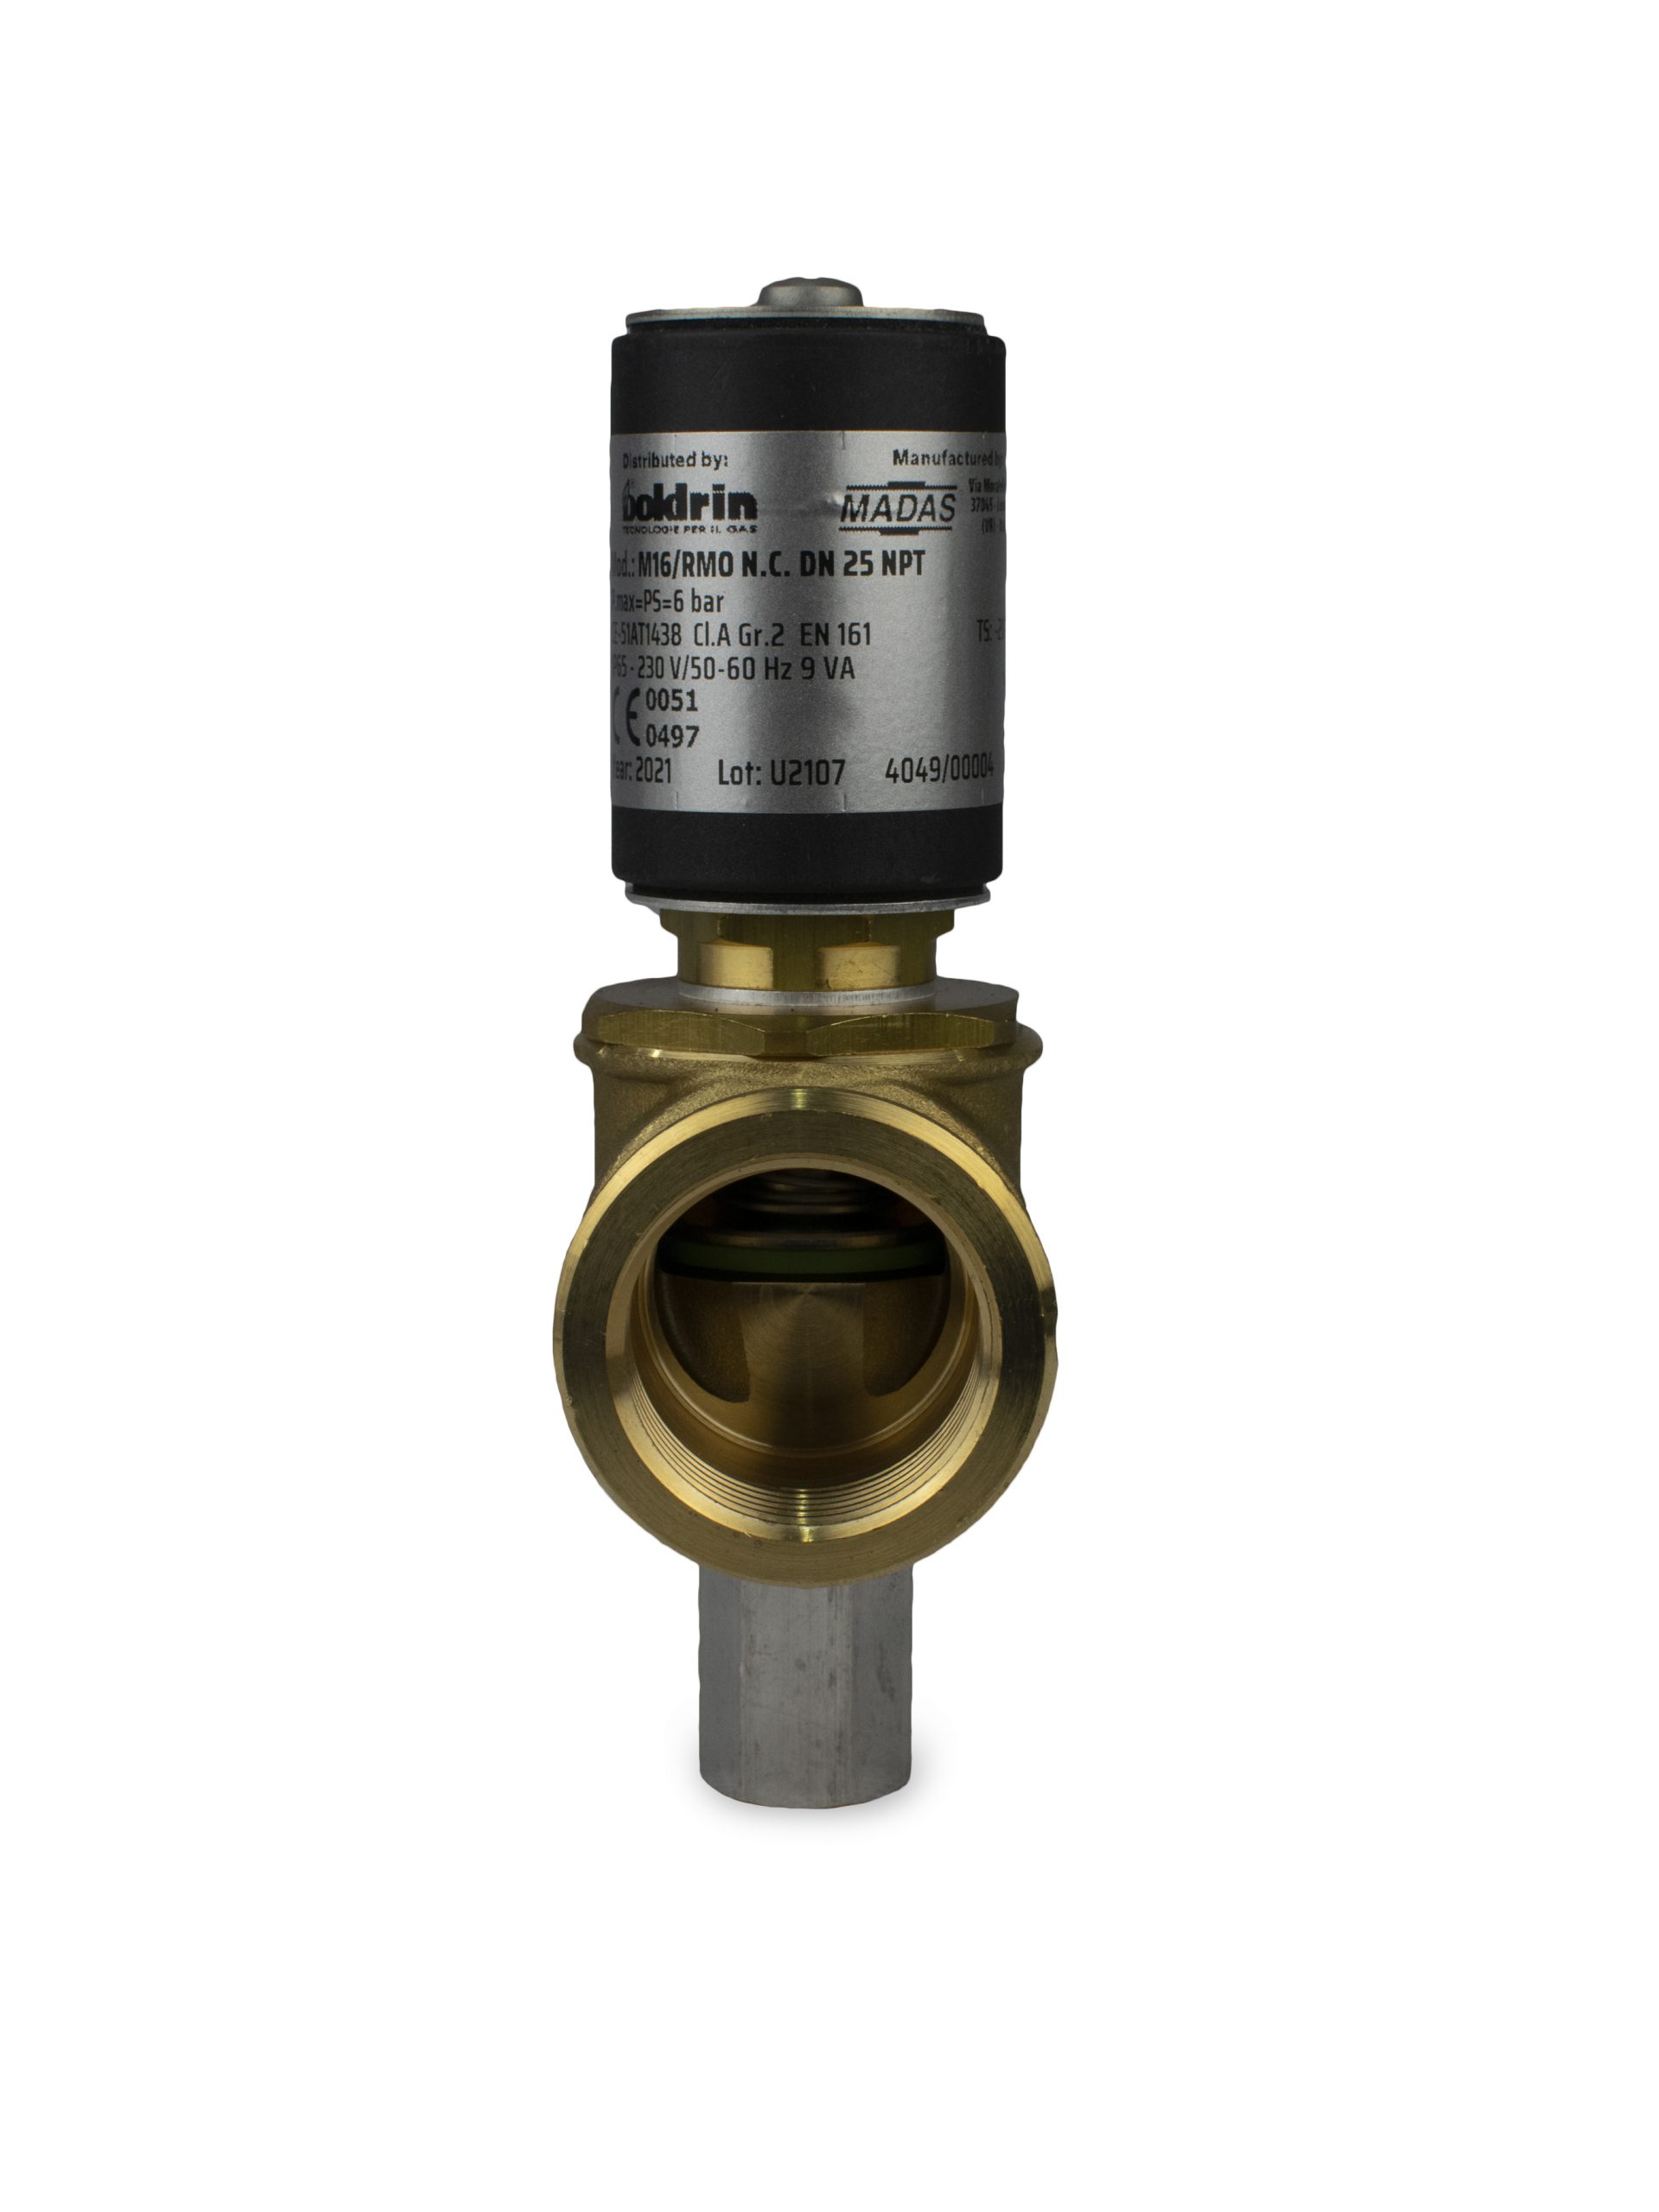 SOLENOID VALVE 1 Inches 240VCDC NORMALLY CLOSED 0-6 BAR from Gas Equipment Company Llc Abu Dhabi, UNITED ARAB EMIRATES